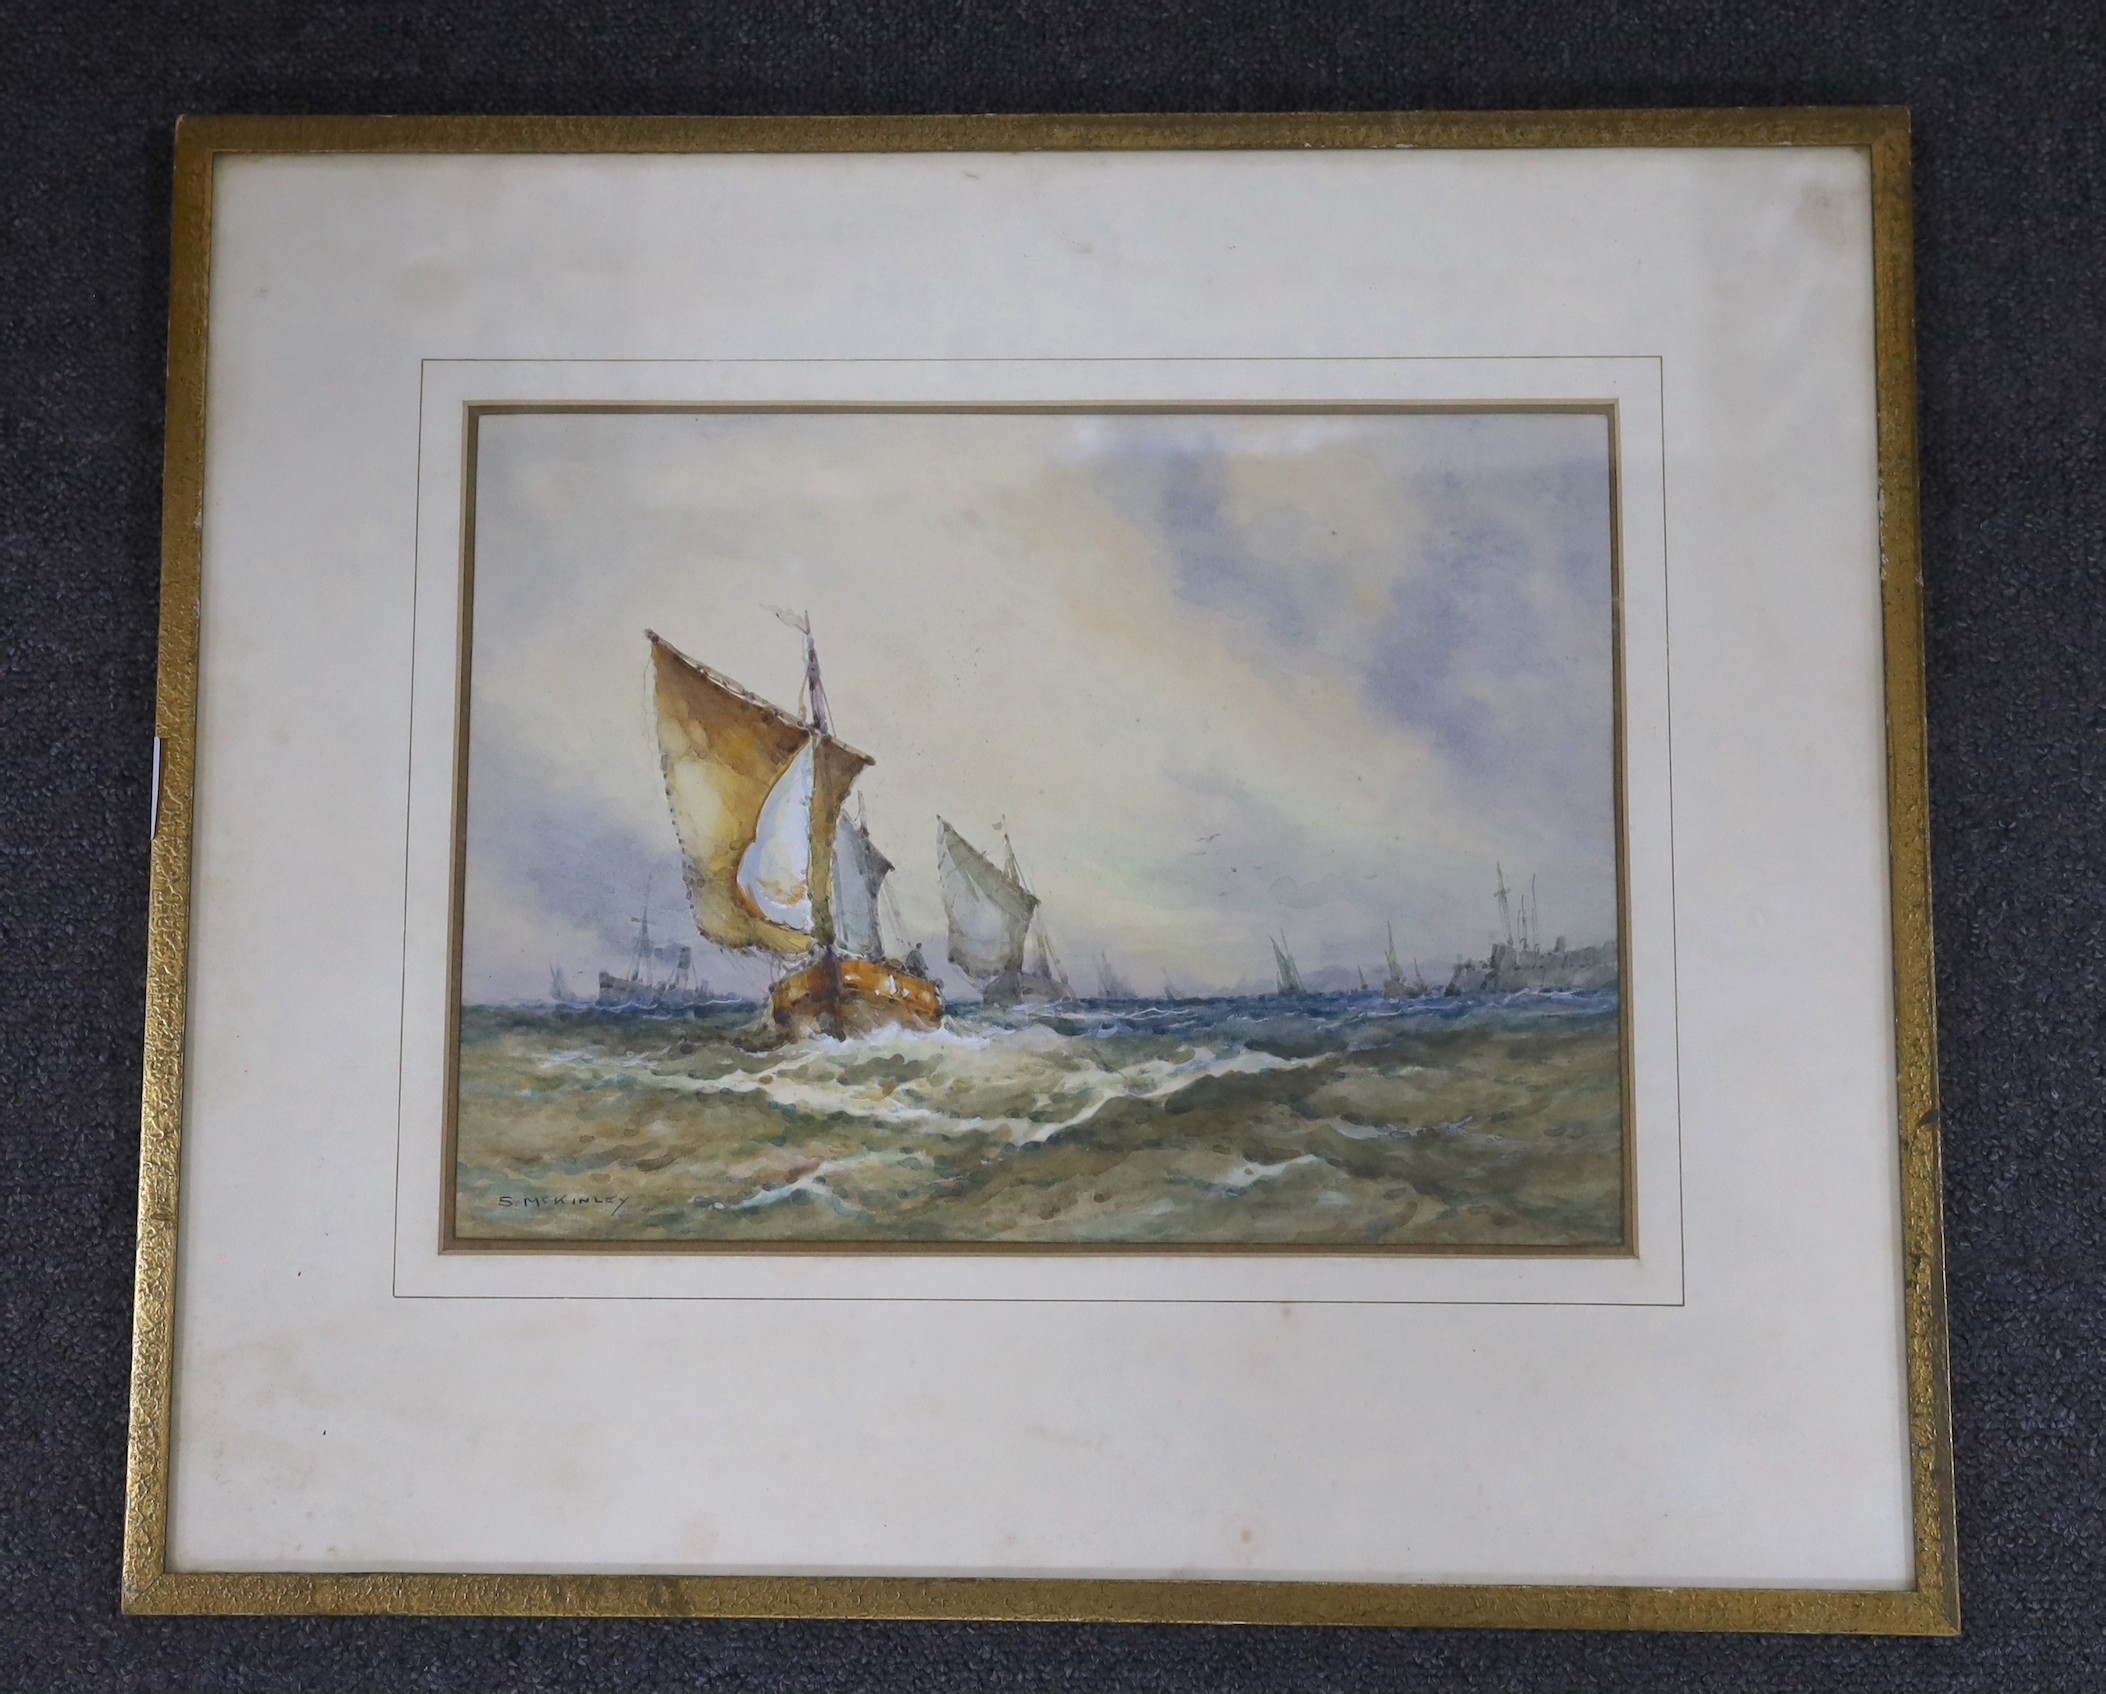 S.McKinley, watercolour, Shipping at sea, signed, 25 x 34cm.